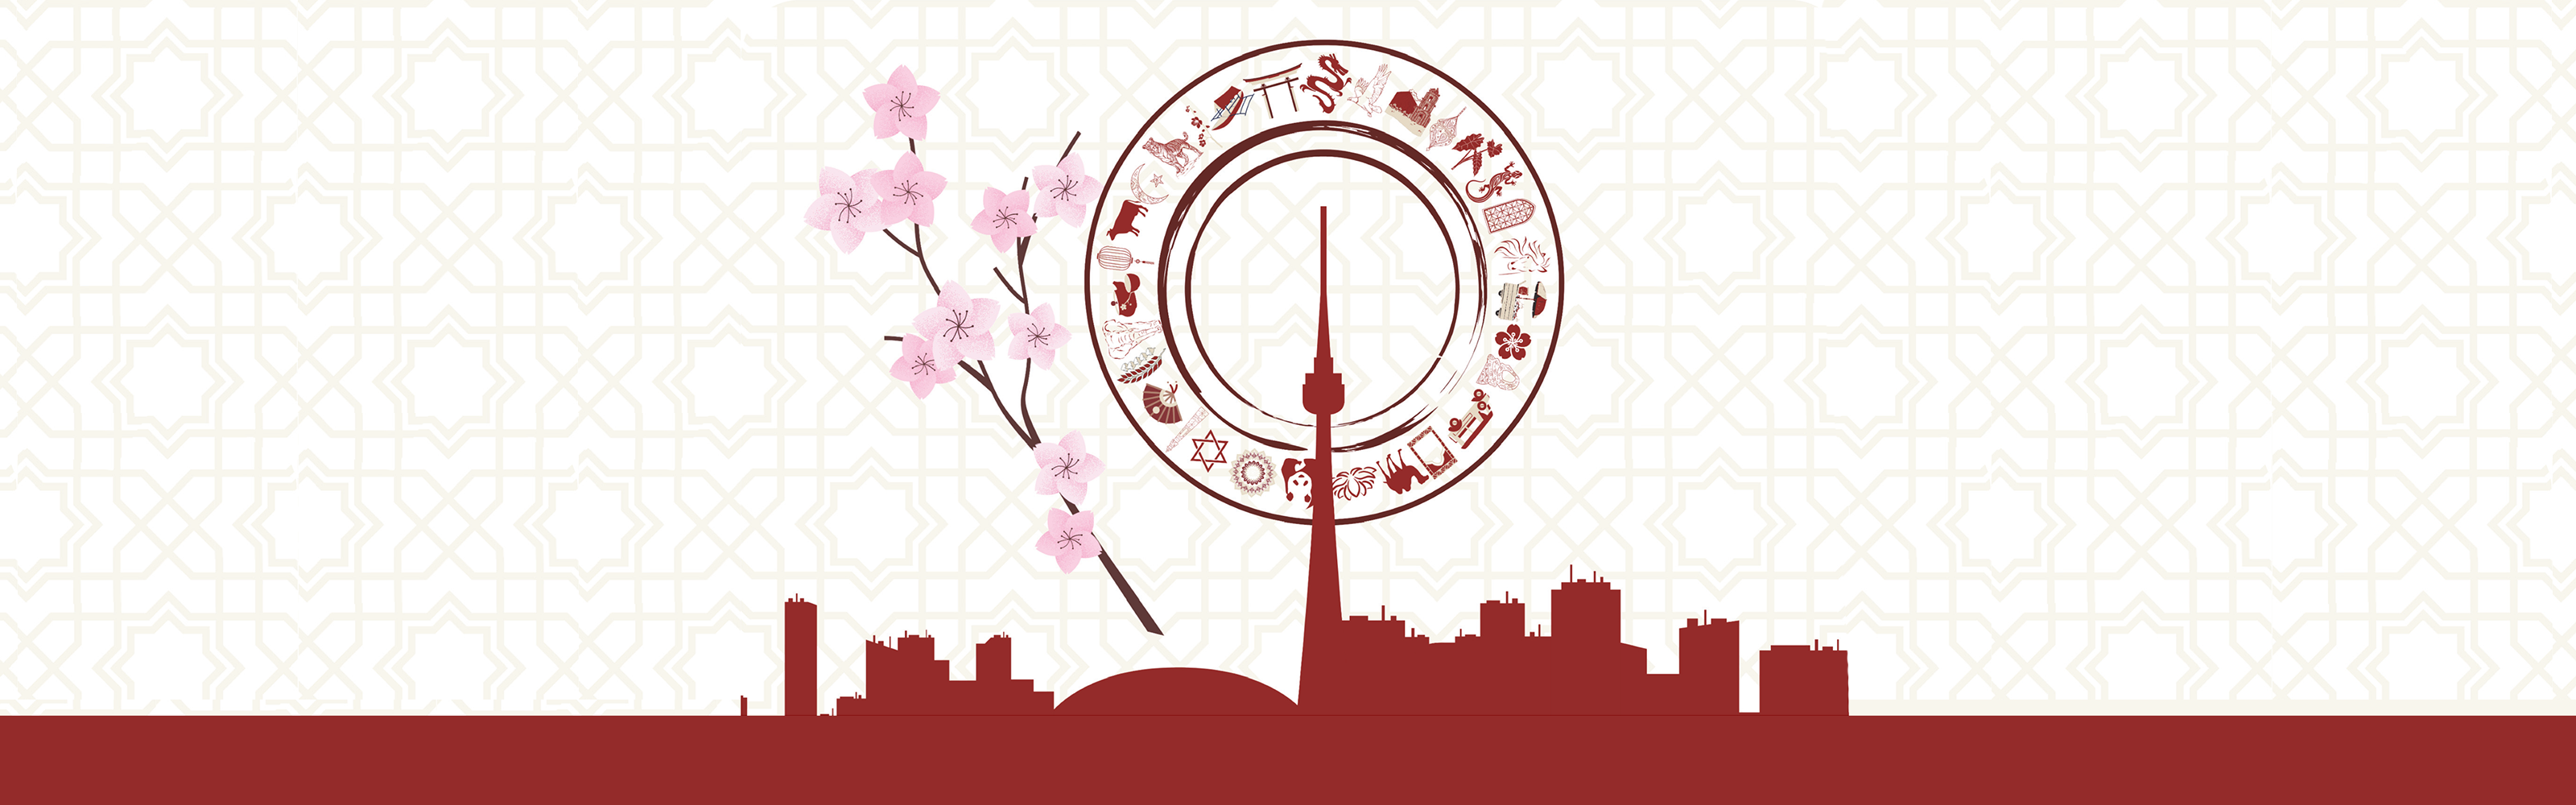 Banner for Asian Canadian Heritage Month, showing a silhouette at the bottom in red of the Toronto skyline. In a circle around the silhouette of the CN Tower are drawn diverse symbols of Asian faith, heritage and culture, including a hand fan, an elephant, a cherry blossom, a camel, a lotus flower, a paifang, and more. On the left of the circle is a cherry blossom branch with pink cherry blossoms flowering on it.